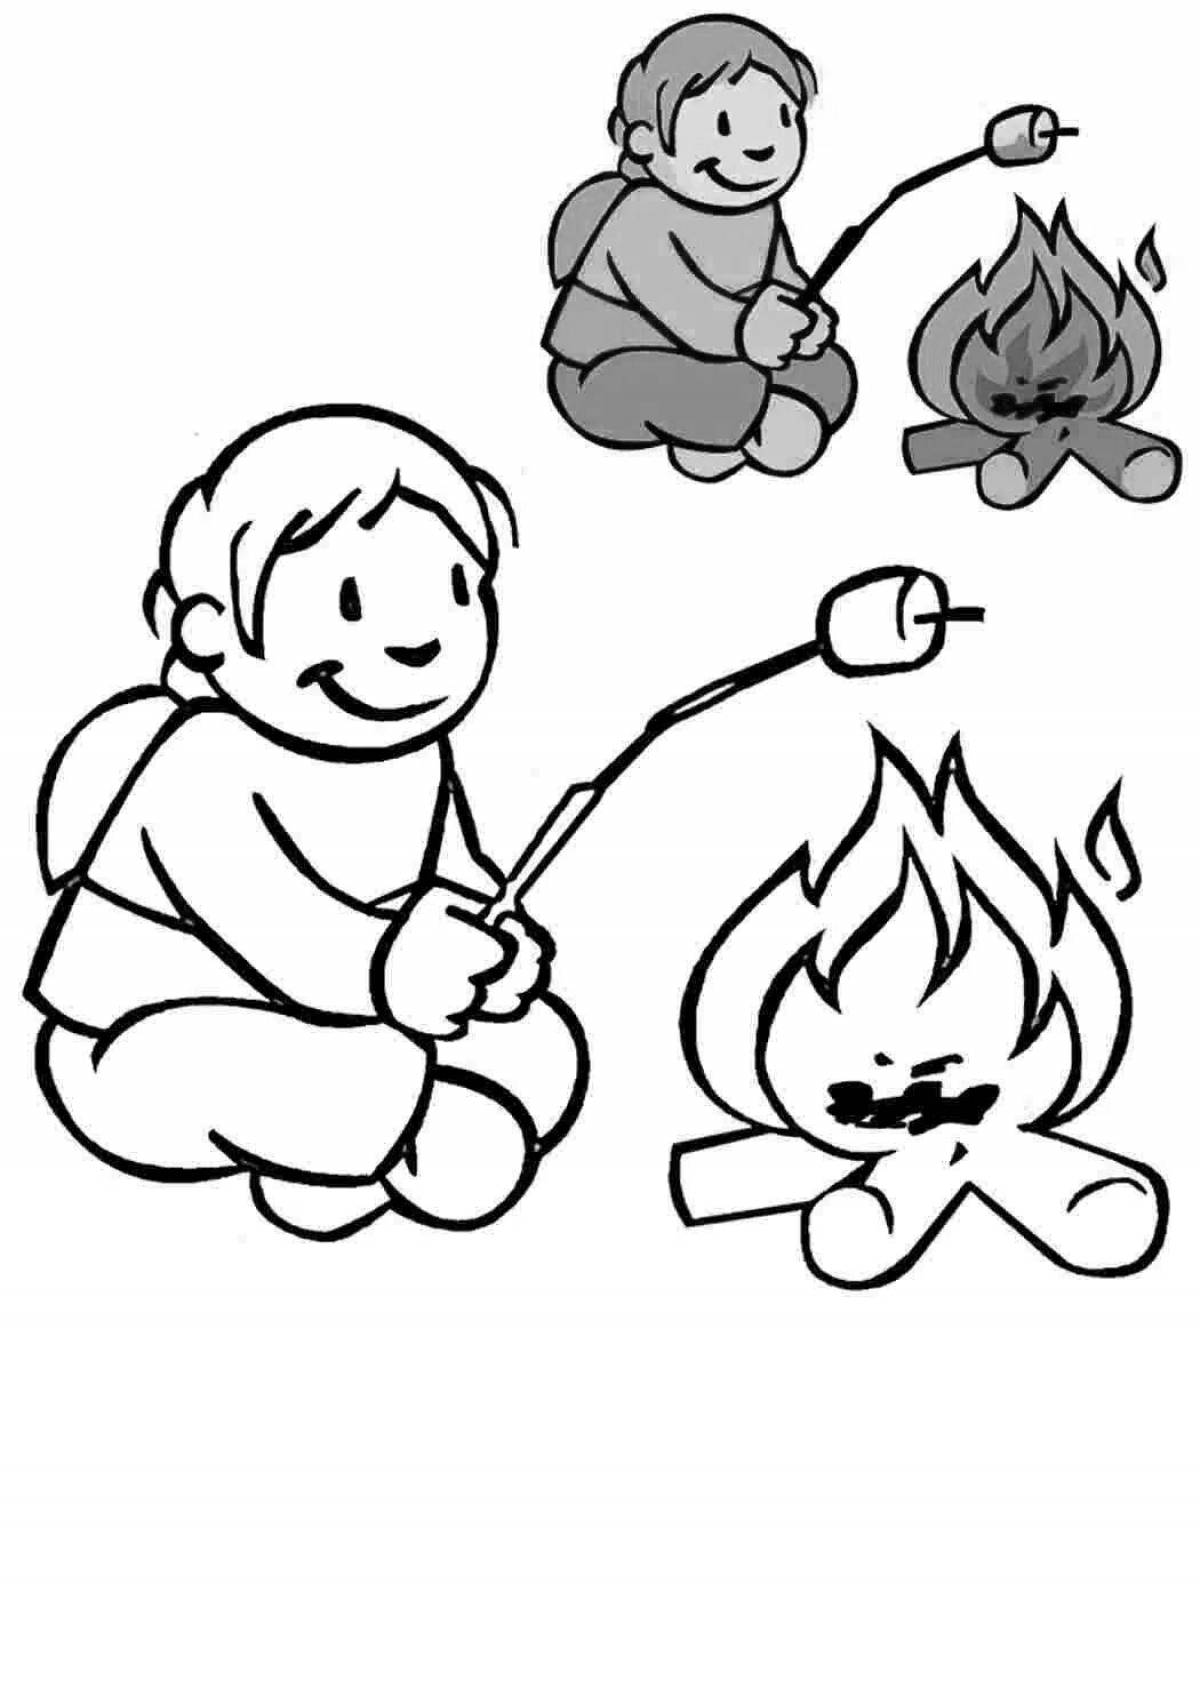 Coloring book beckoning fire for children 3-4 years old